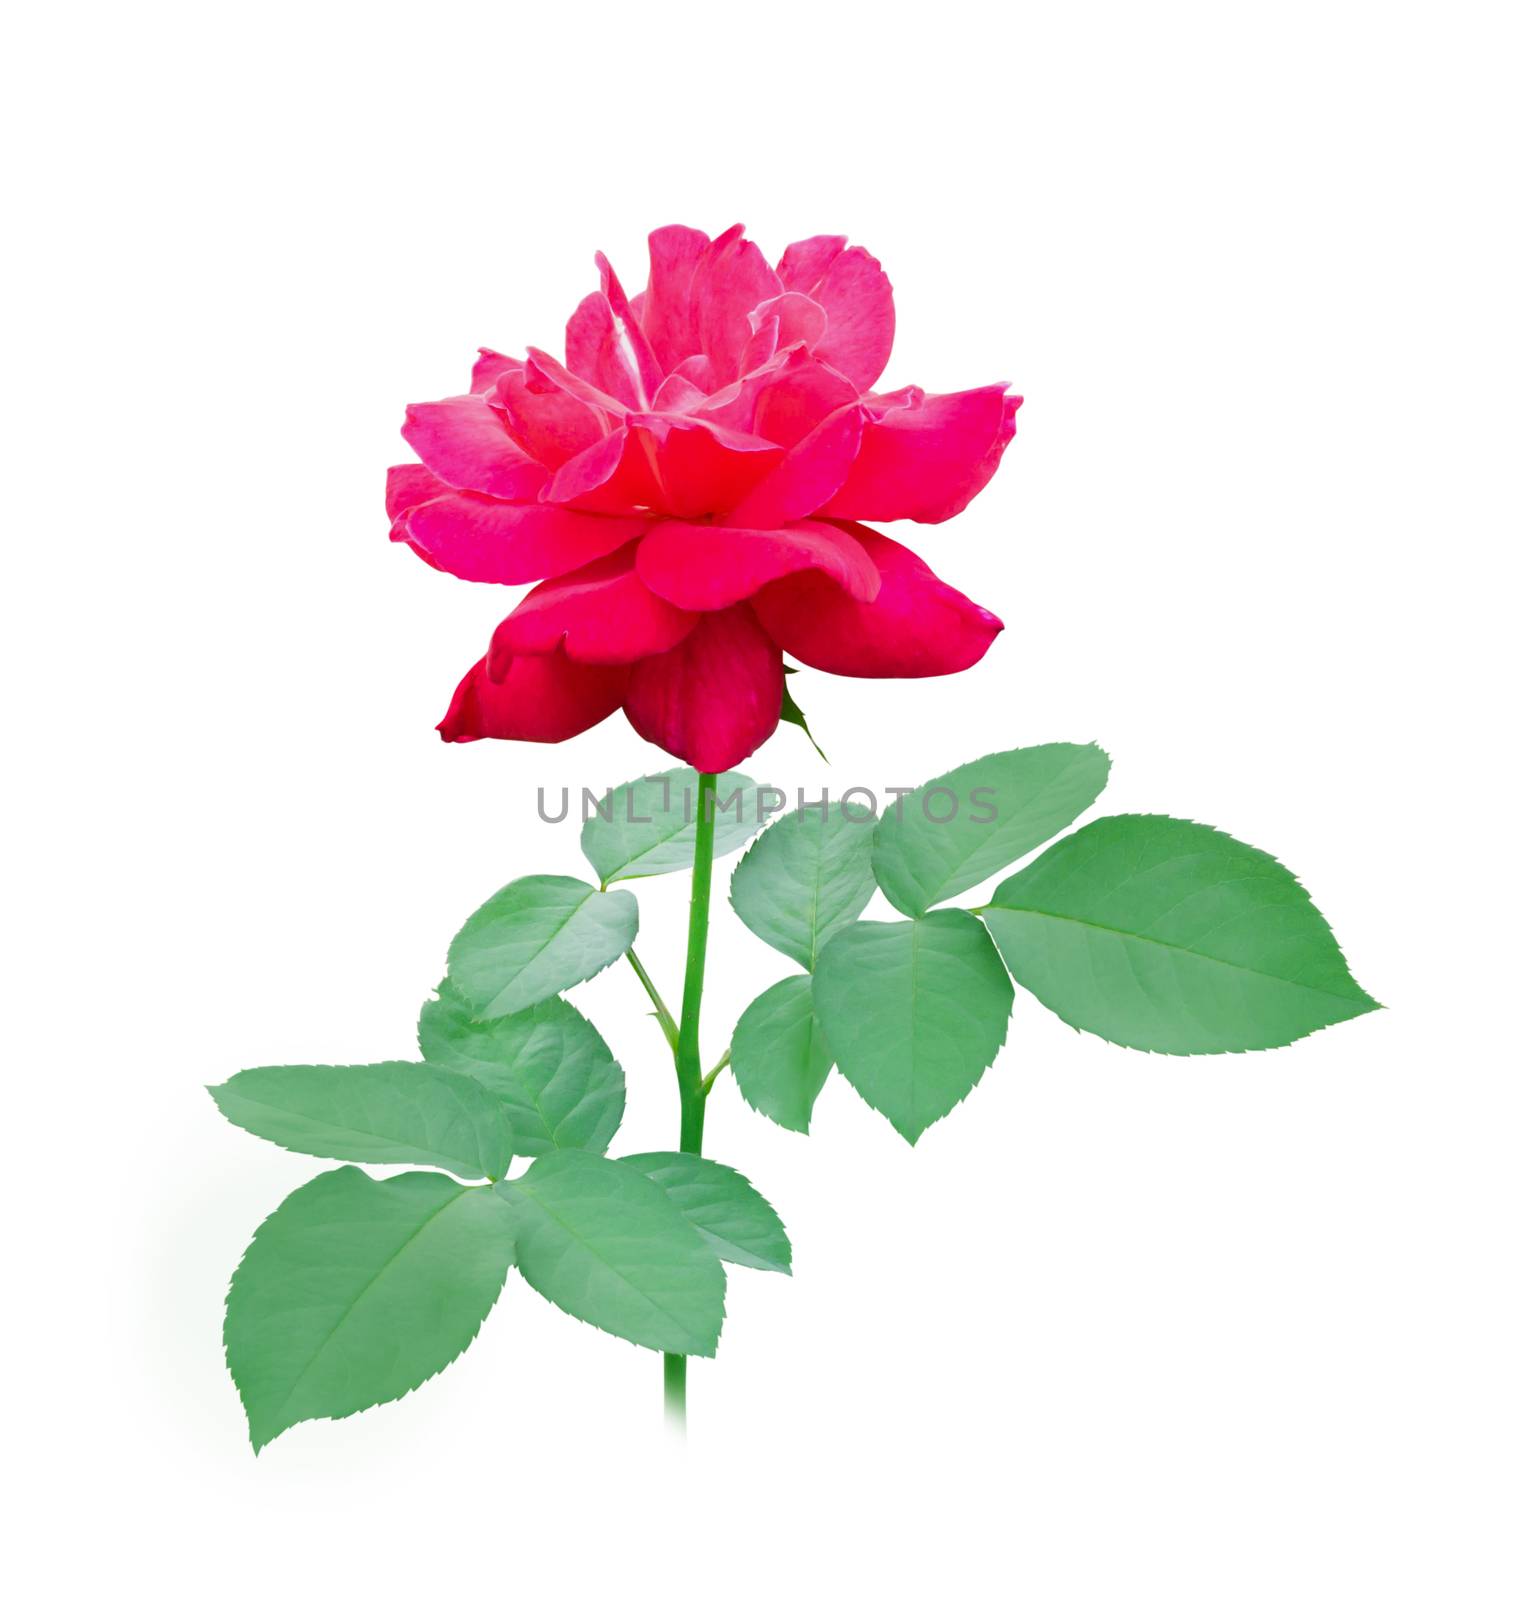 Beautiful red rose flower with leaf isolated on white background